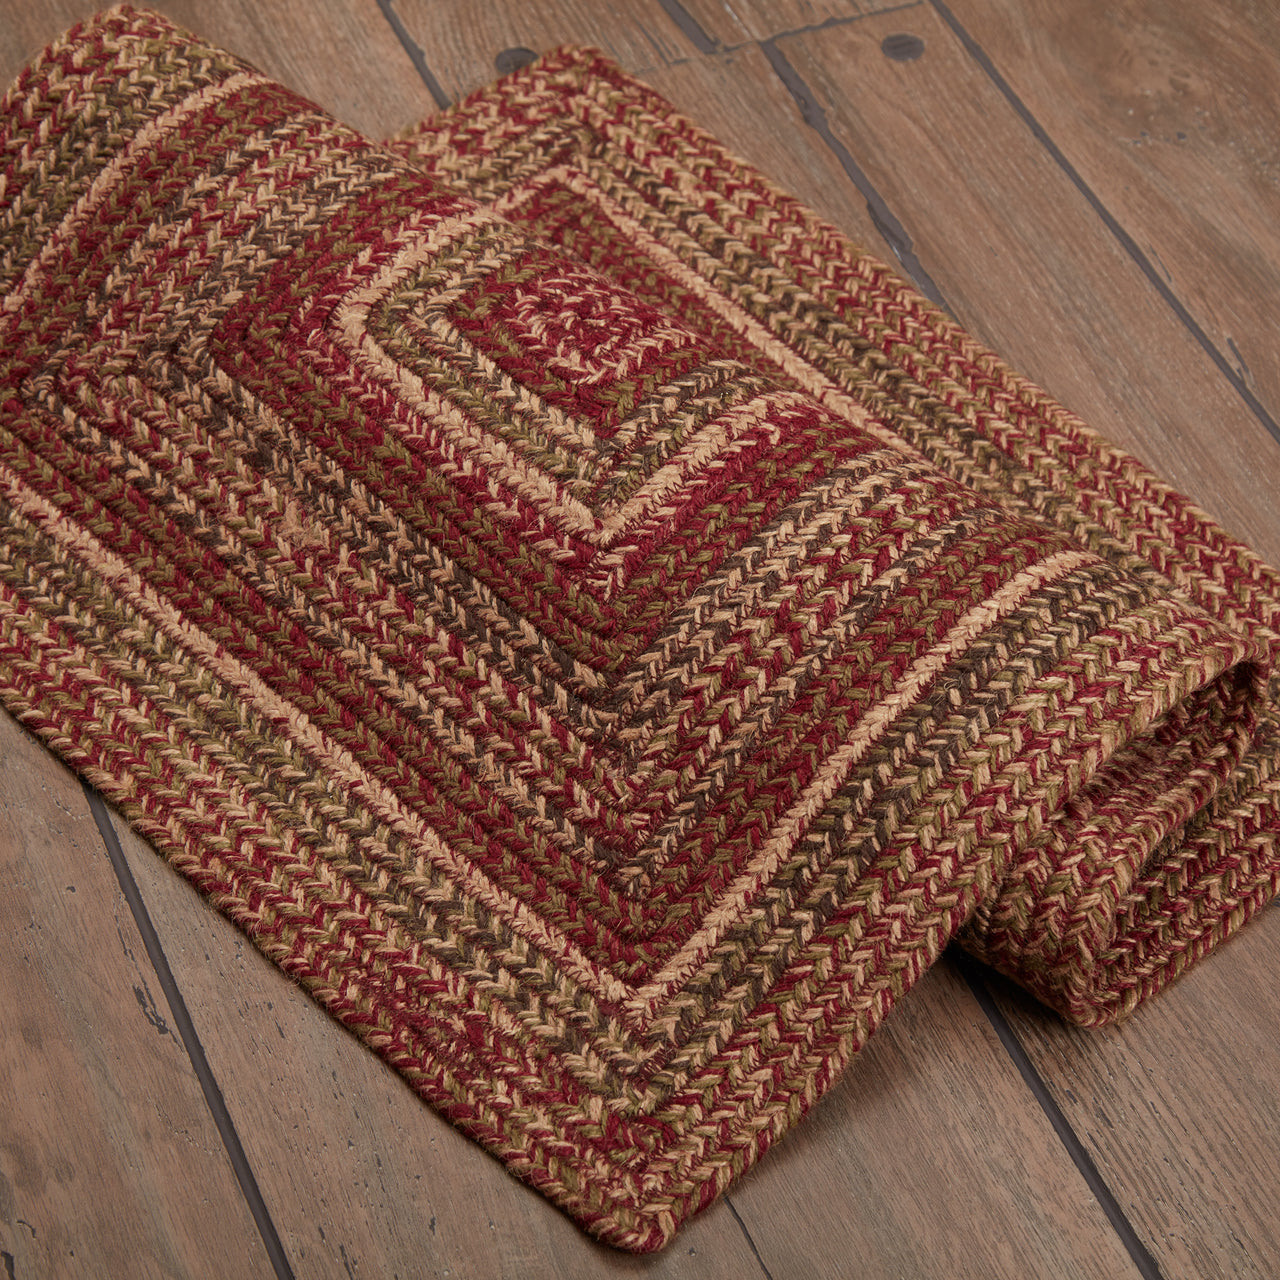 Cider Mill Jute Braided Rug Rect 20"x30"with Rug Pad VHC Brands